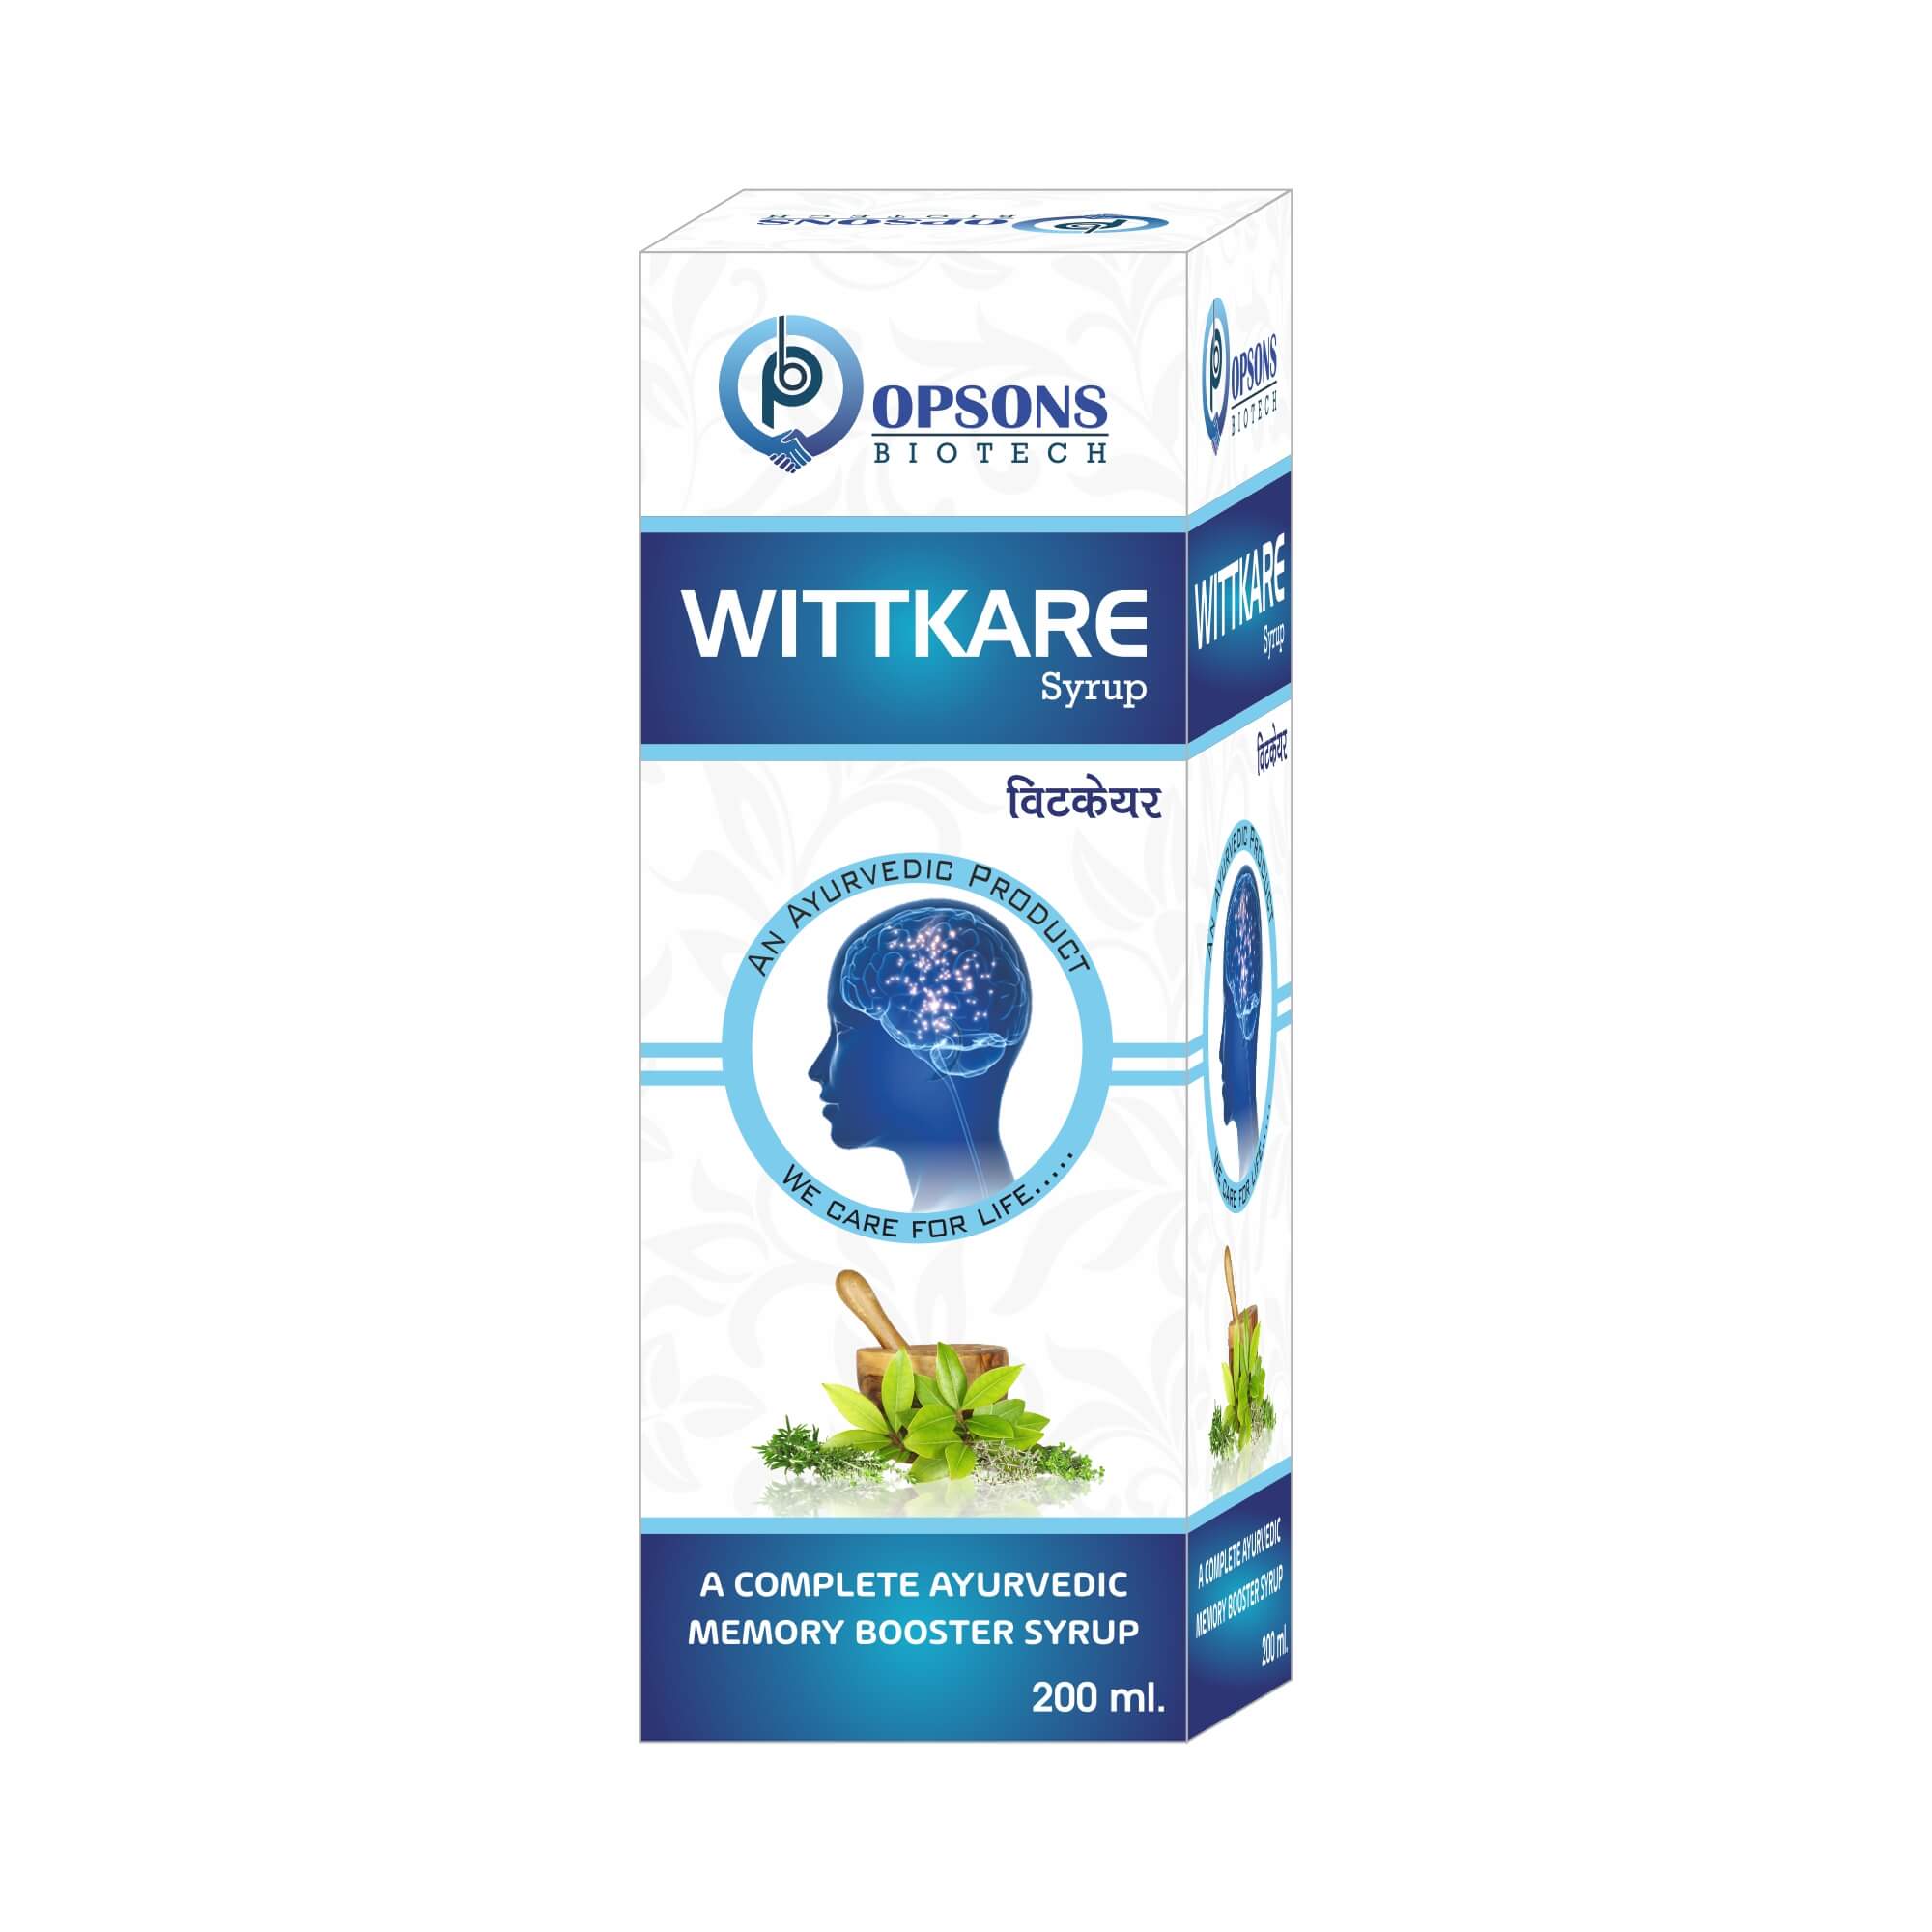 Product Name: Wittkare, Compositions of A Complete Ayurvedic Memory Booster Syrup are A Complete Ayurvedic Memory Booster Syrup - Opsons Biotech